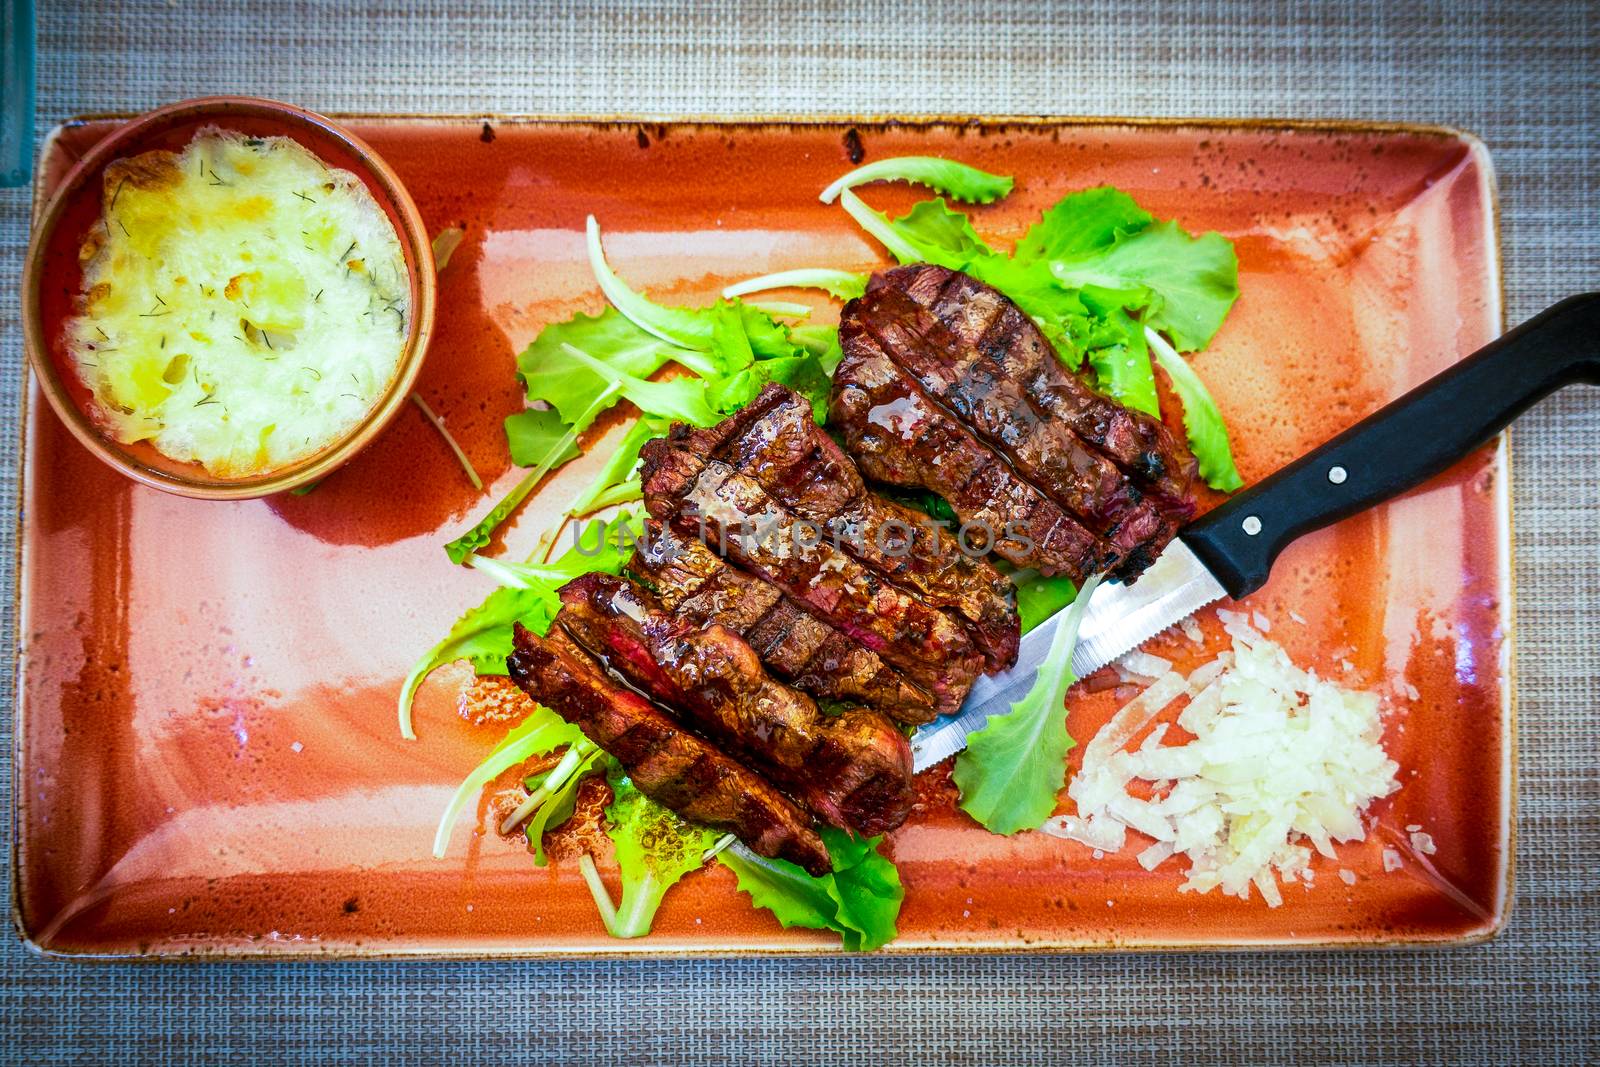 Top view of Traditional Italian Tagliata Steak with Parmesan and Salad as close-up on a plate, salad sparkled with Aceto Balsamico vinegar